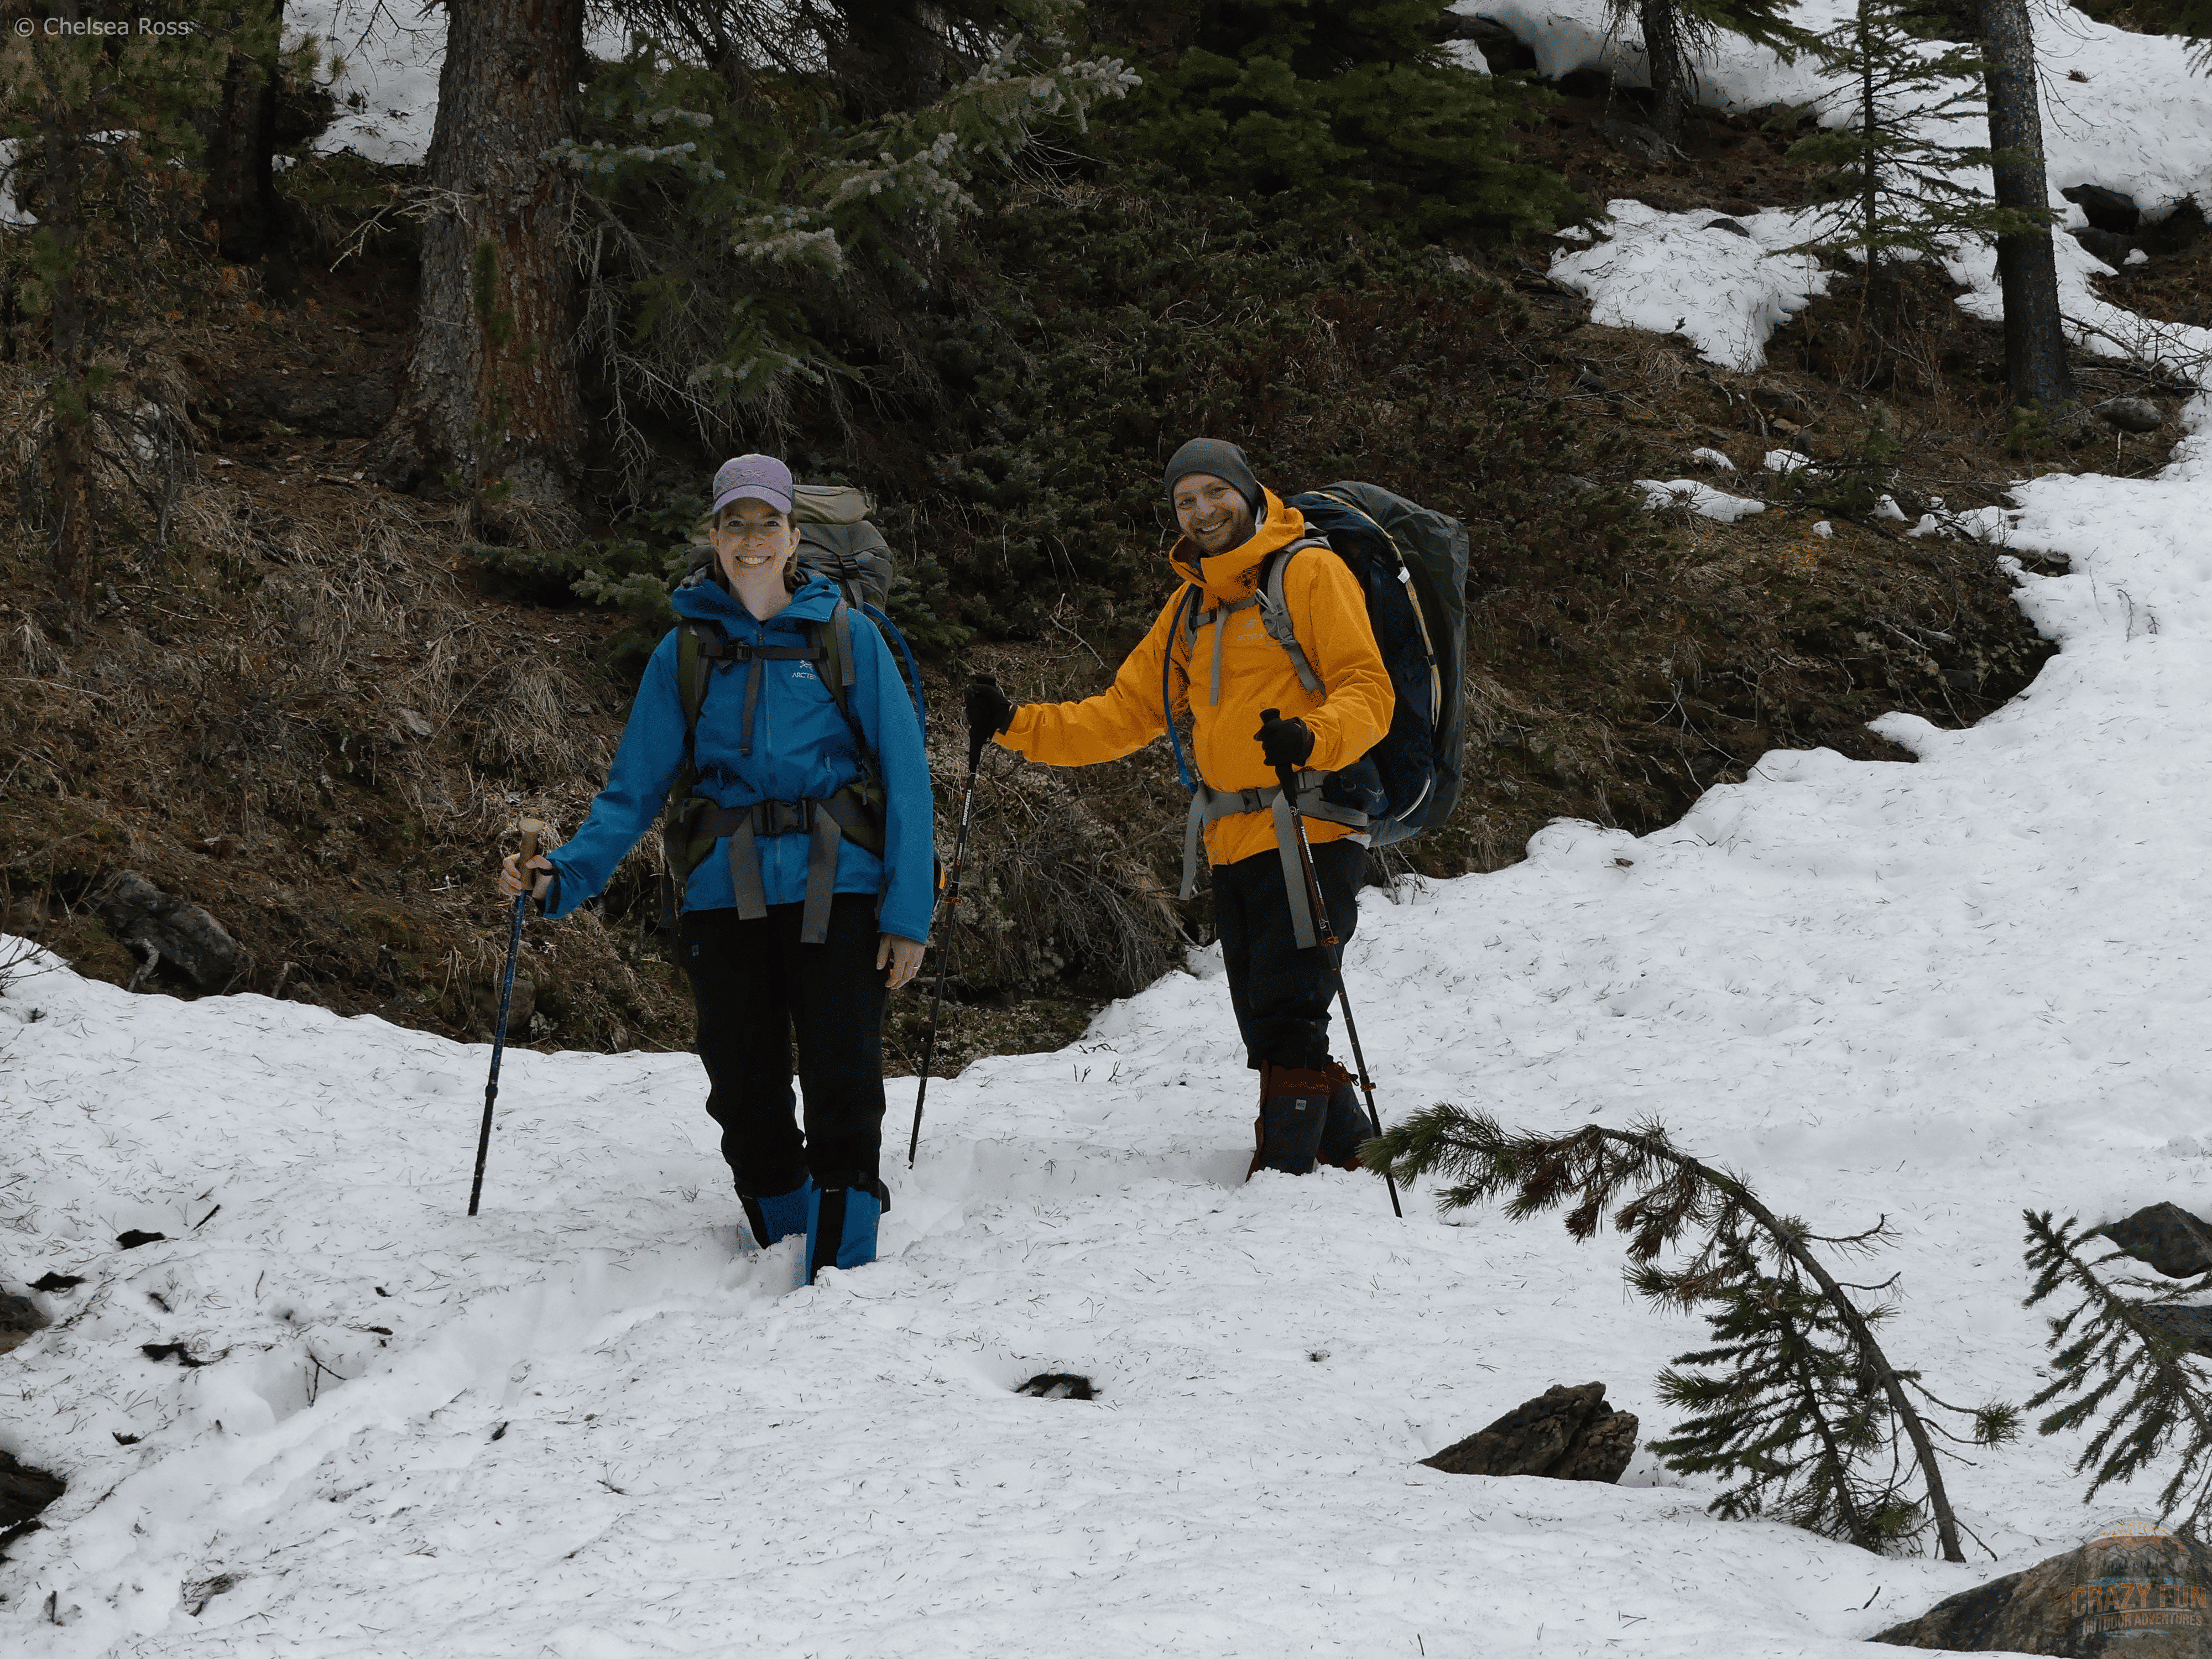 The red MEC Kokanee Gore-Tex Gaiters being showcased while backpacking in the snow.